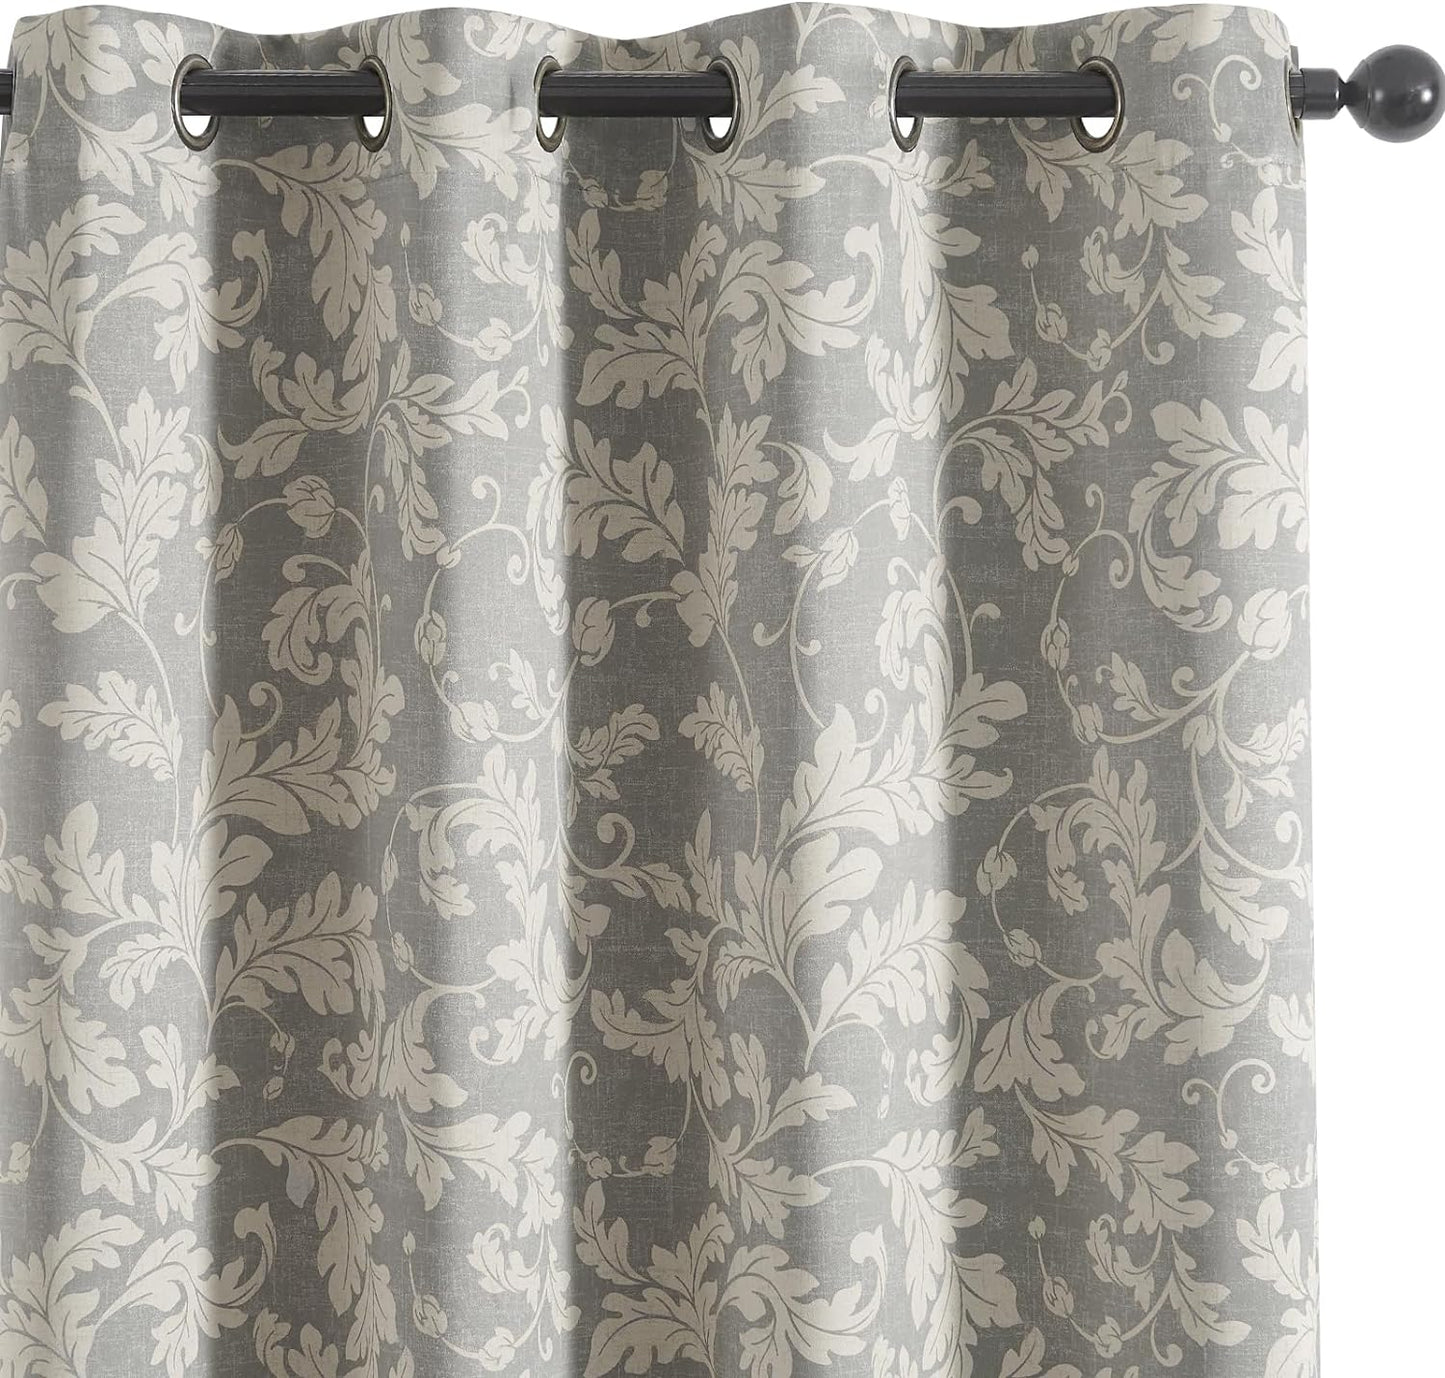 Jinchan 80% Blackout Curtains for Living Room, Farmhouse Drapes with Scroll Floral Patterned for Bedroom, Grommet Top Thermal Insulated Curtains, Vintage Country Curtain 84 Inch Length 2 Panels Blue  CKNY HOME FASHION B | Leaf Grey 75 Blackout 63"L 